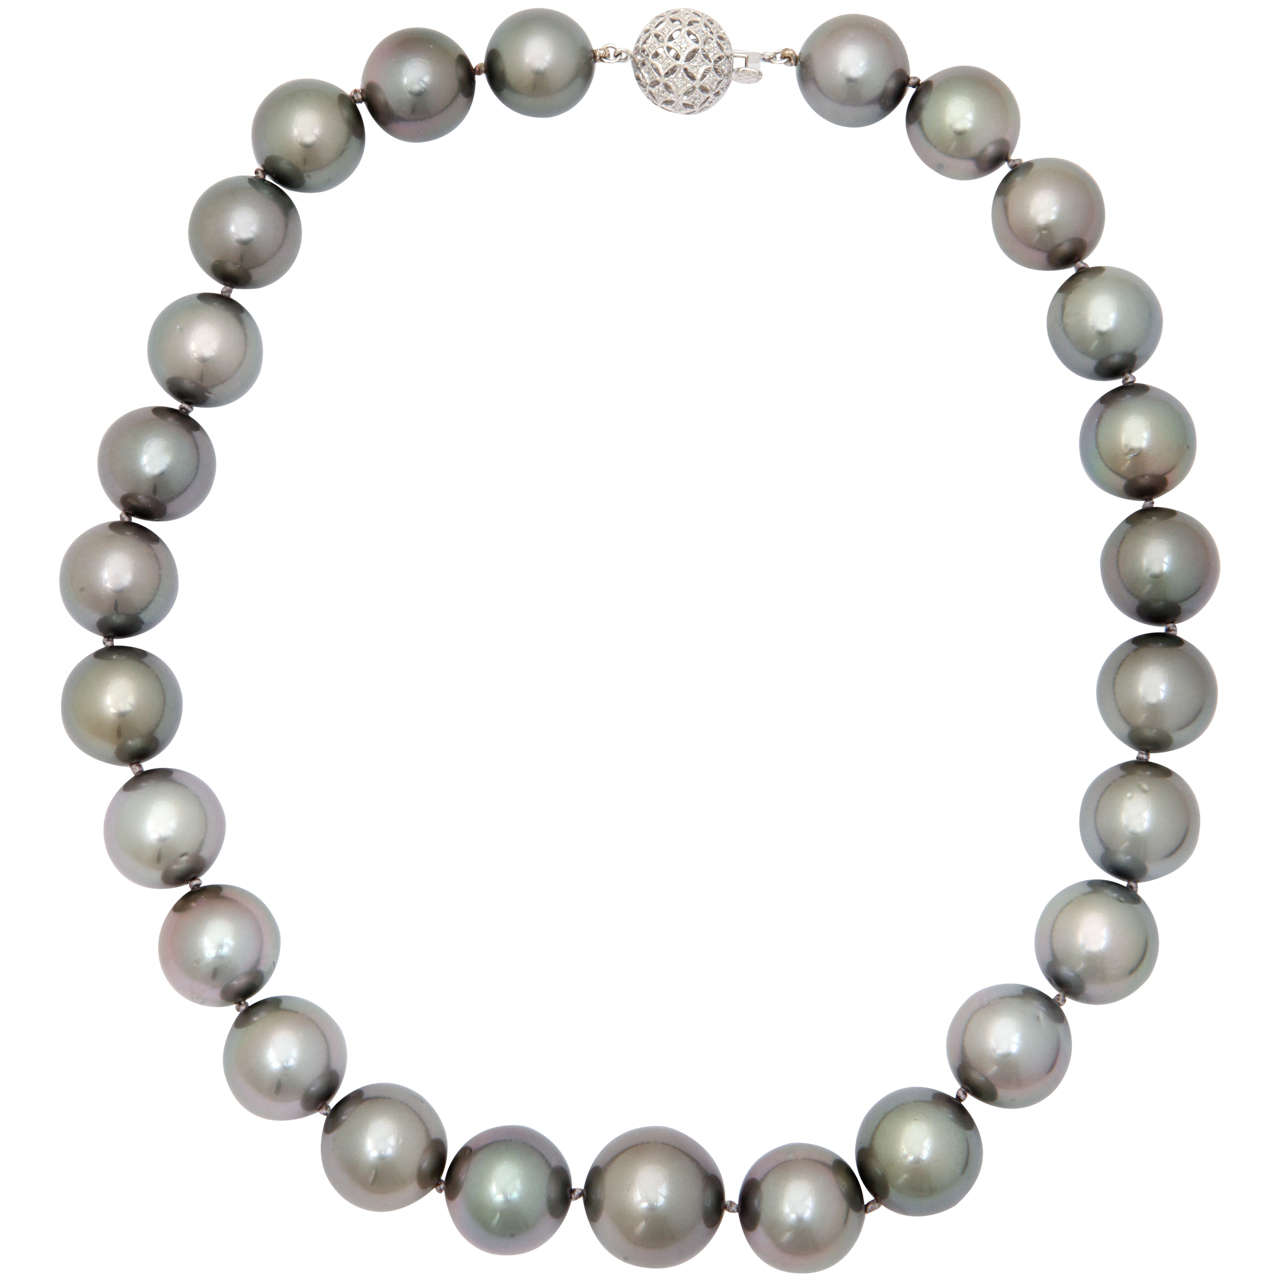 Exquisite Large Grey Tahitian Pearls For Sale